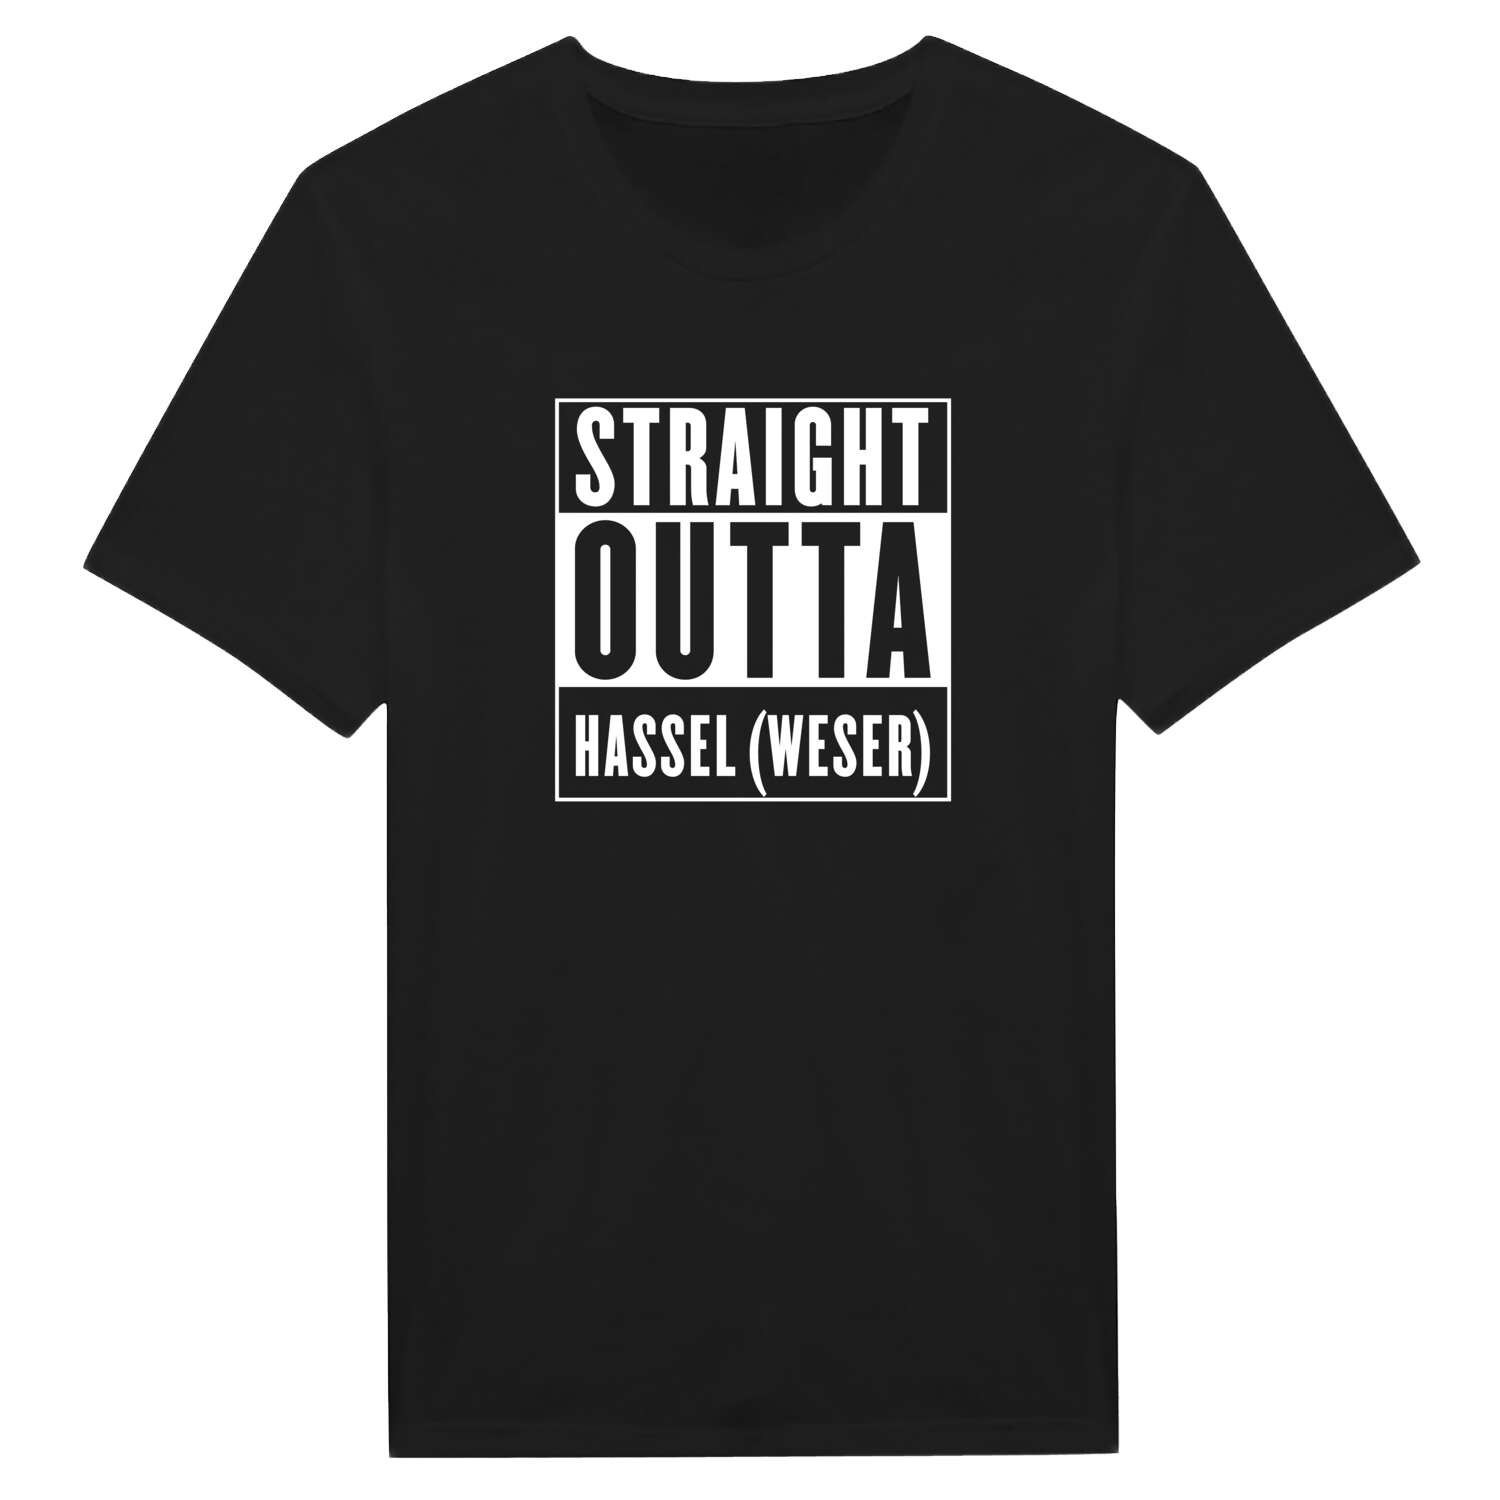 Hassel (Weser) T-Shirt »Straight Outta«